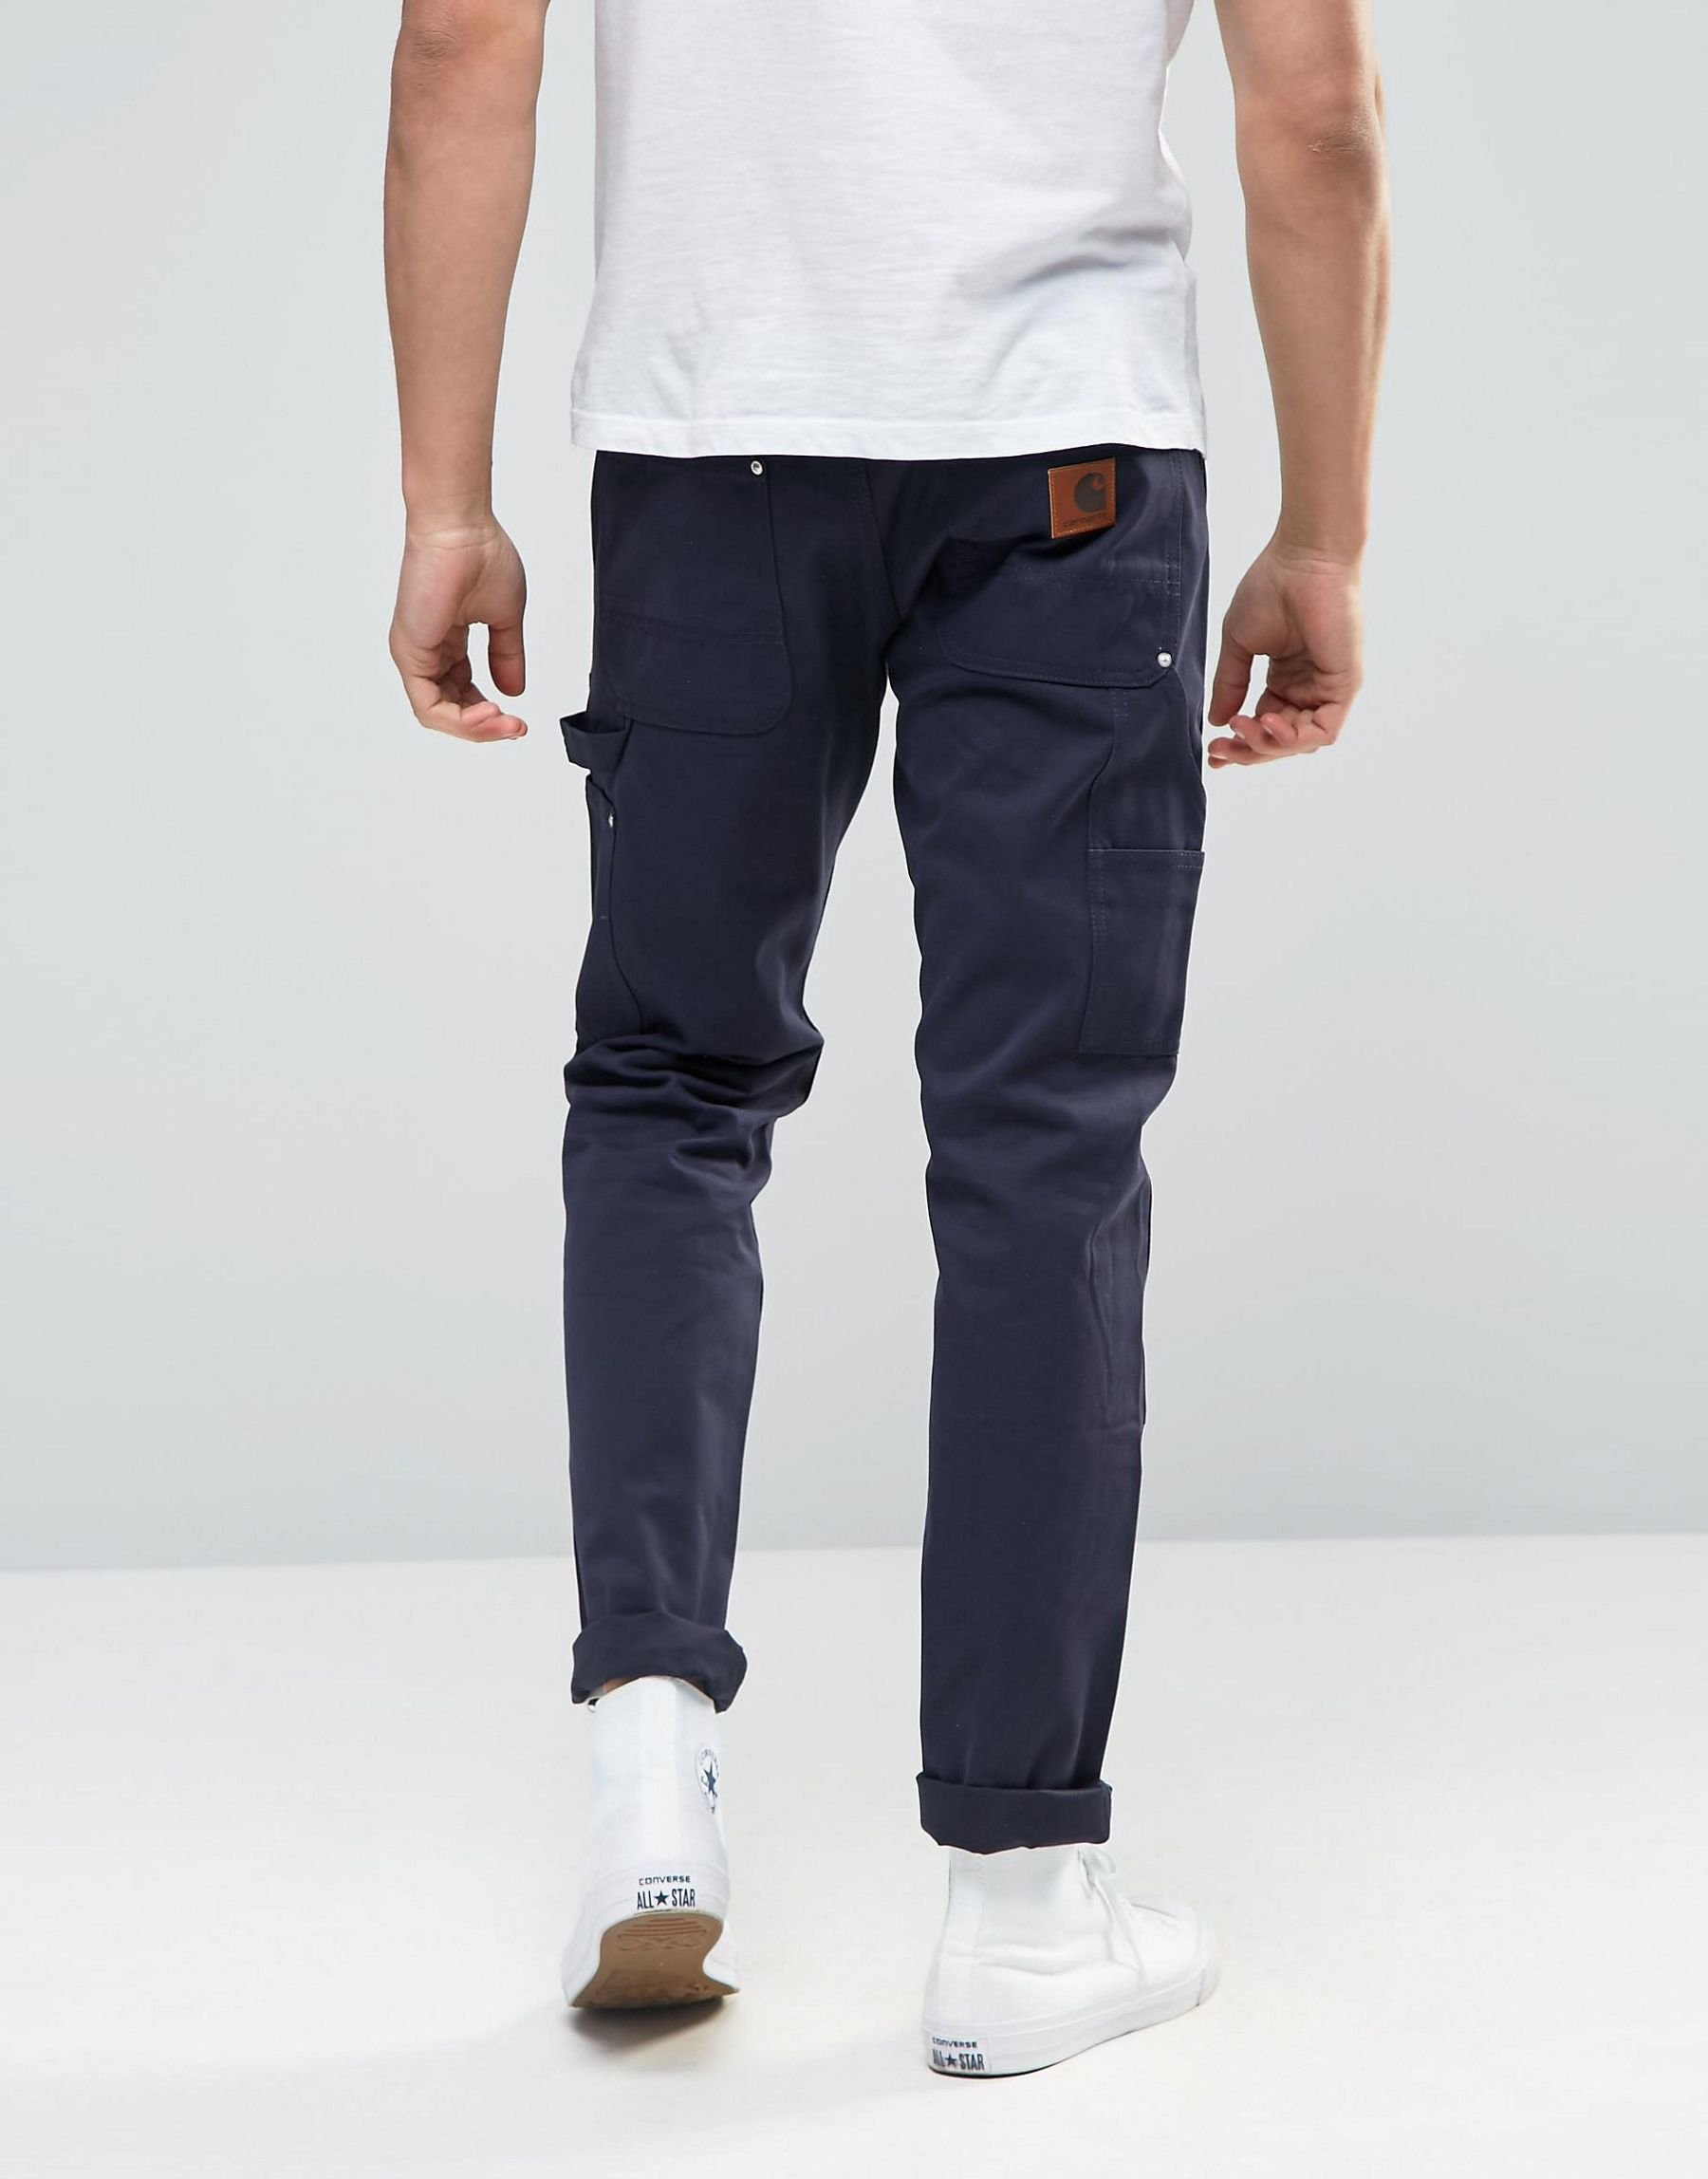 Carhartt WIP Cotton Lincoln Double Knee Pant in Navy (Blue) for 